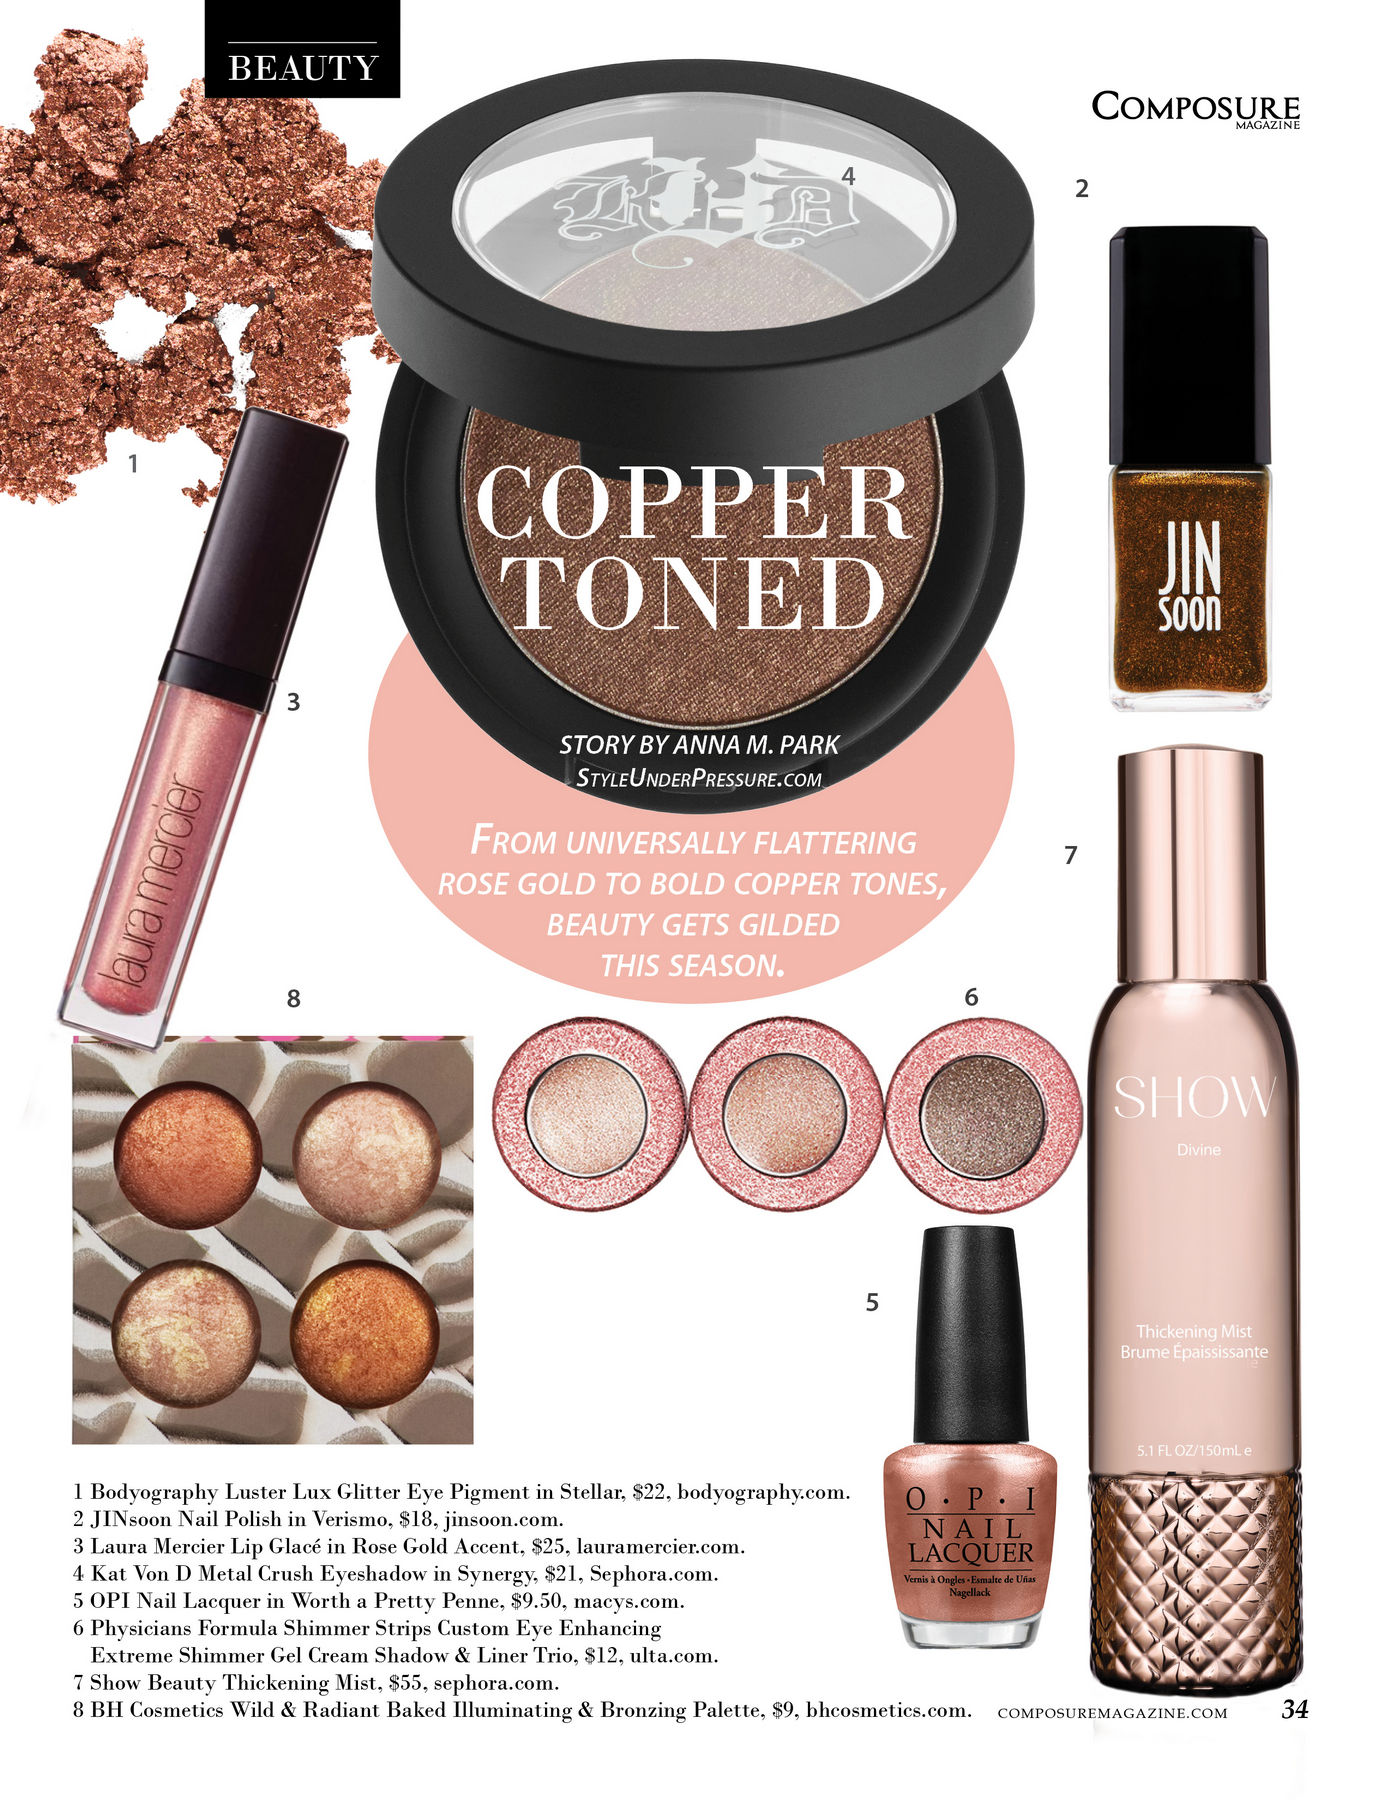 Beauty Tips: Copper Toned by Anna M. Park